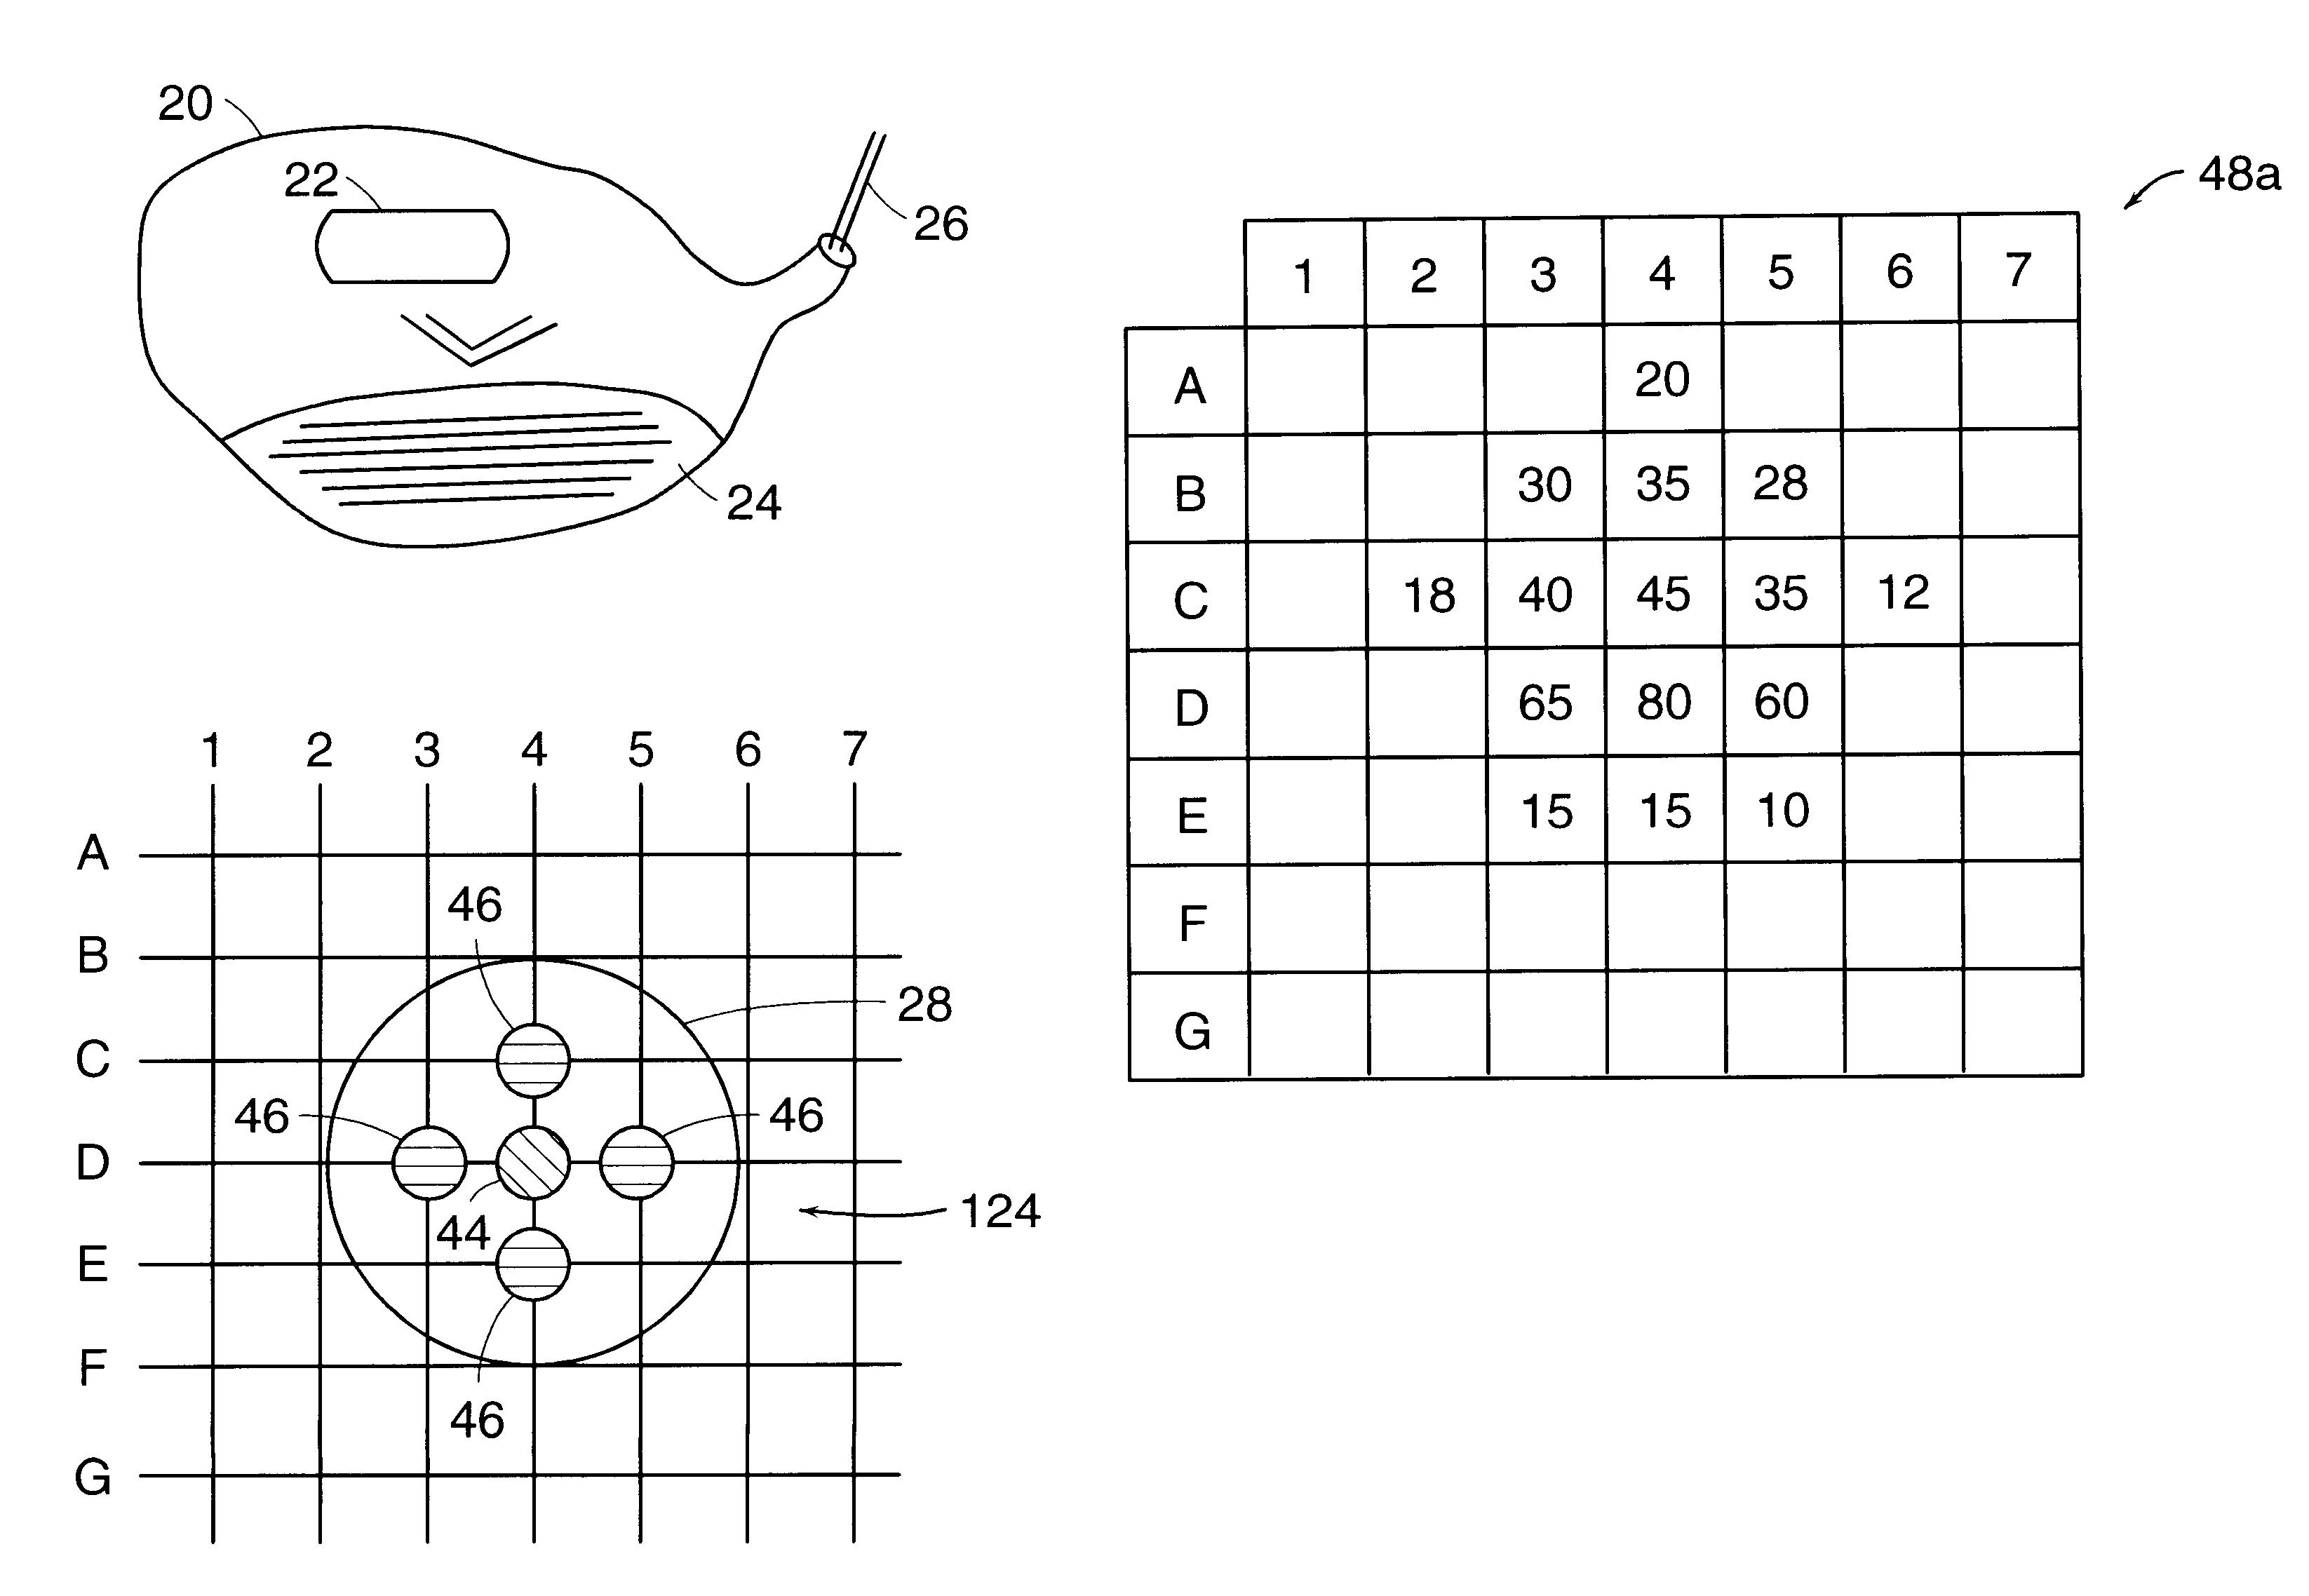 Instrumented sports apparatus and feedback method